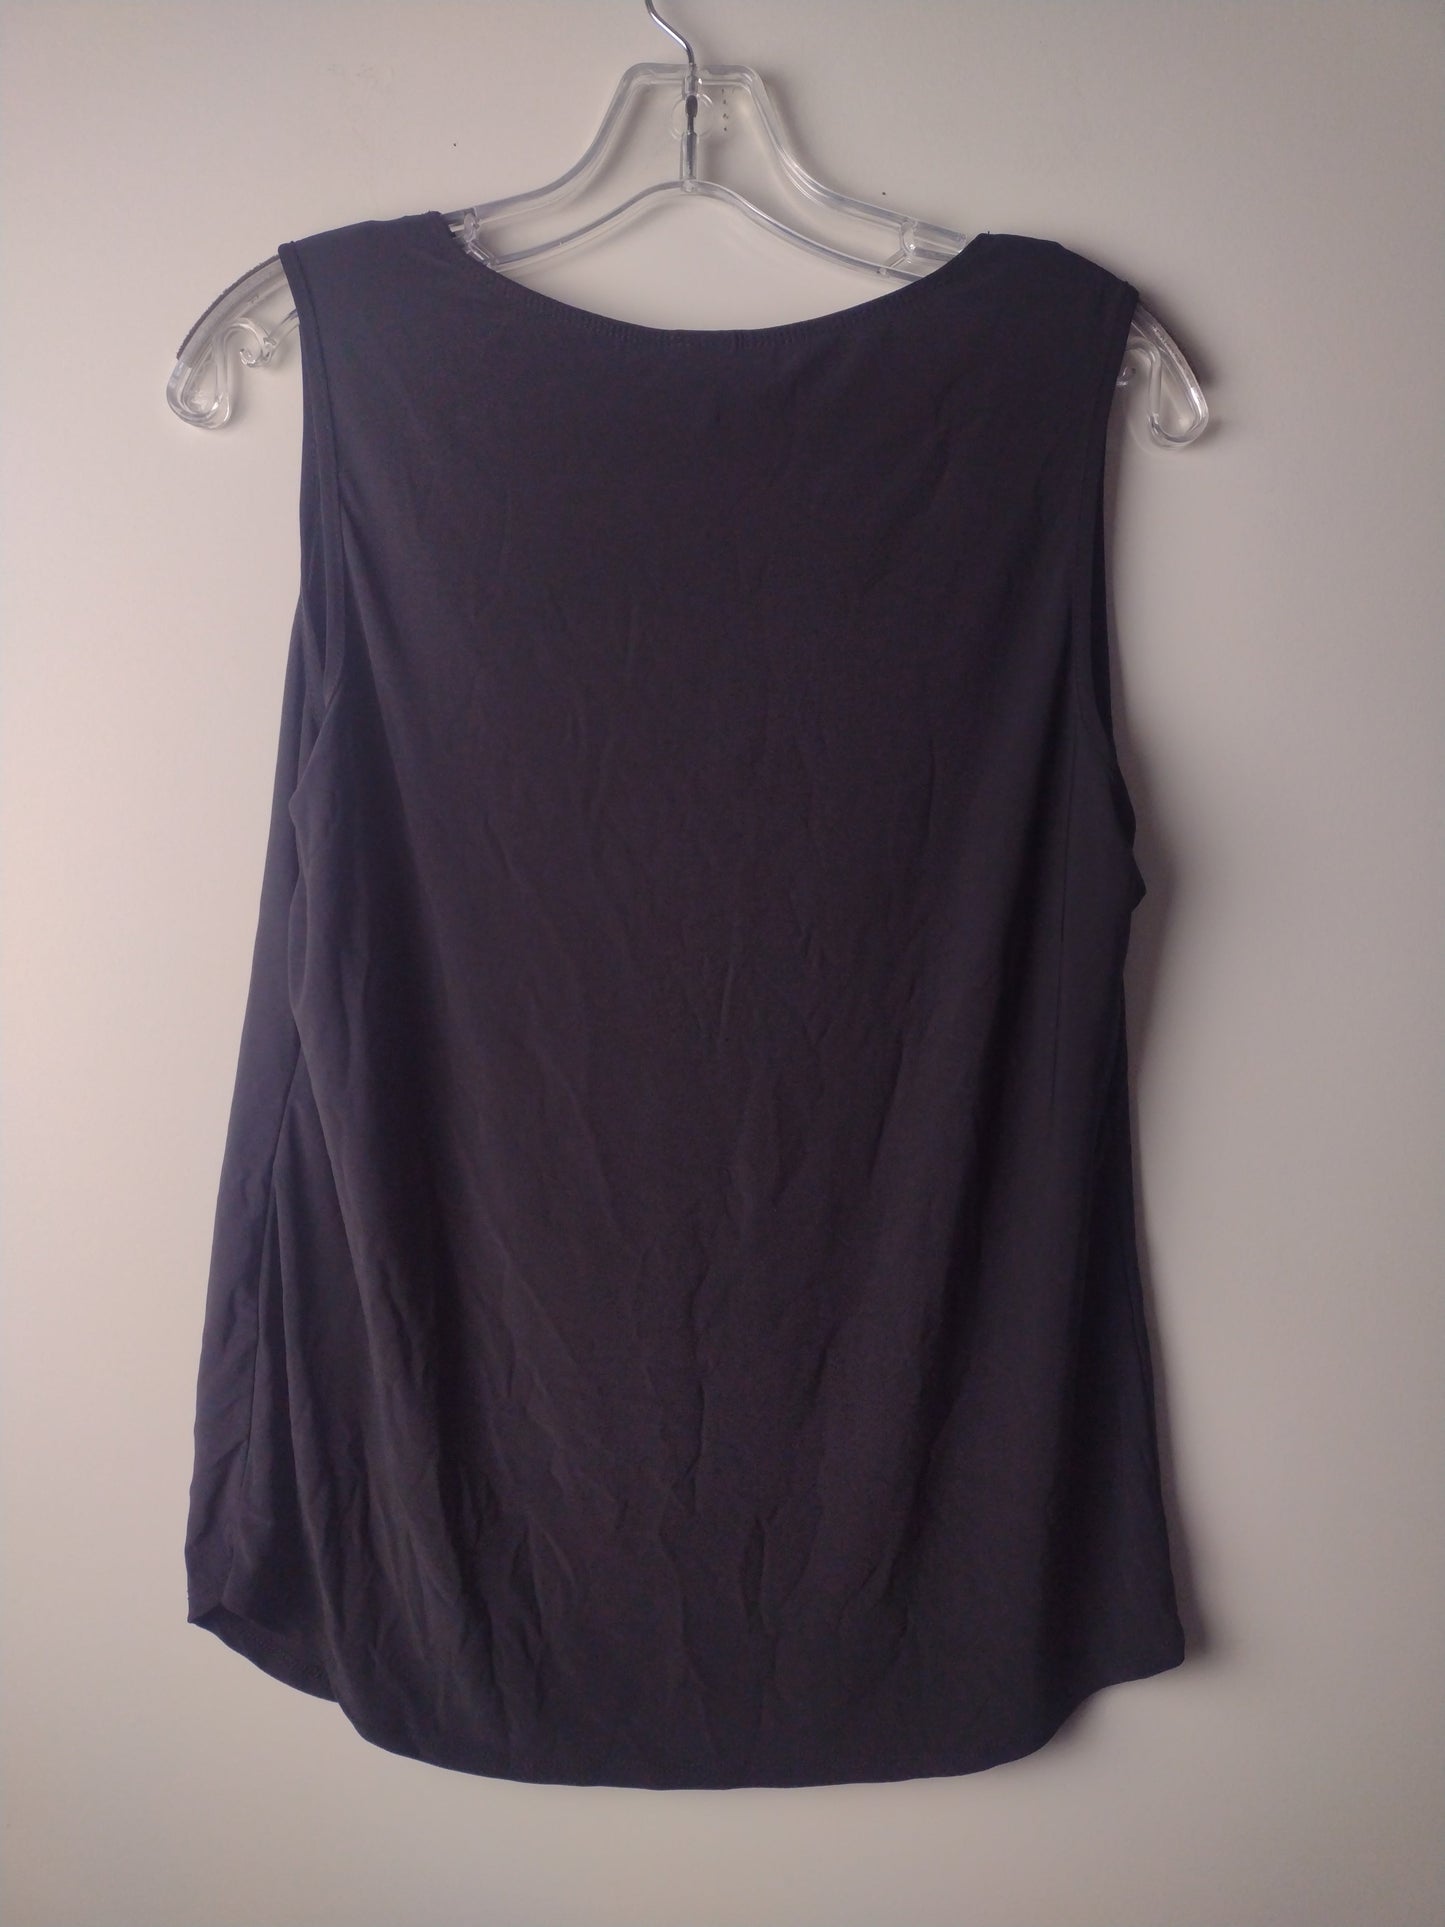 Top Sleeveless By Perseption Concept  Size: S